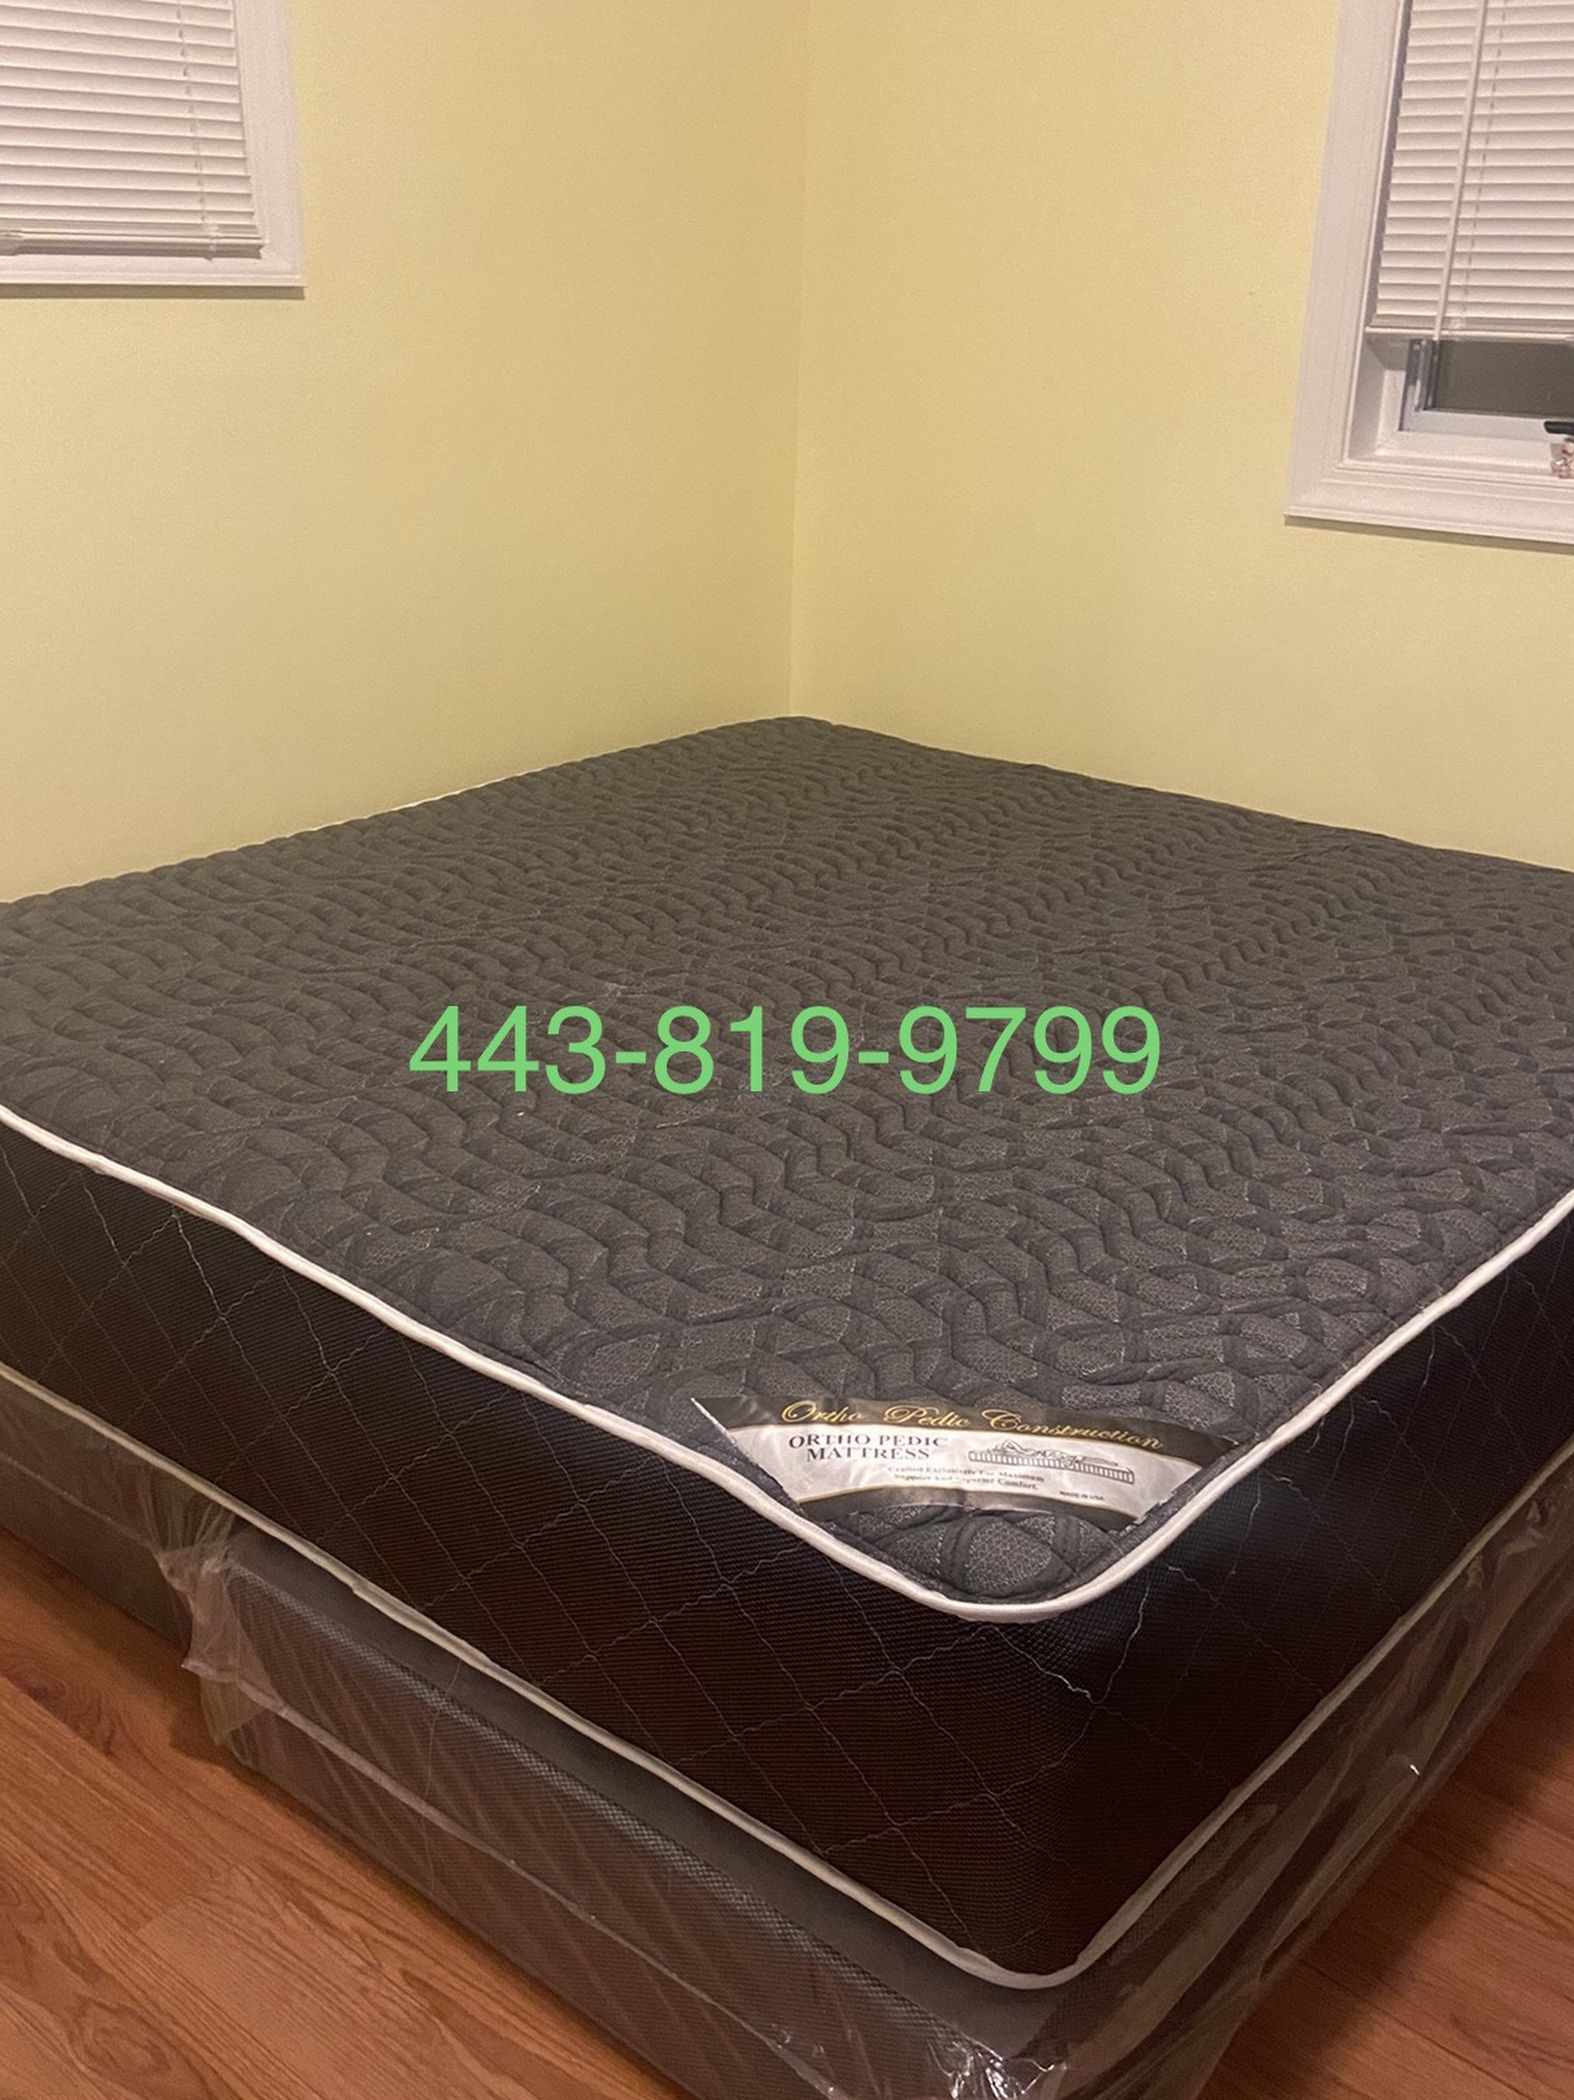 New Queen Mattress - Double Sides /14 Inch And Come With Free Box Spring - Free Delivery 🚚 Today